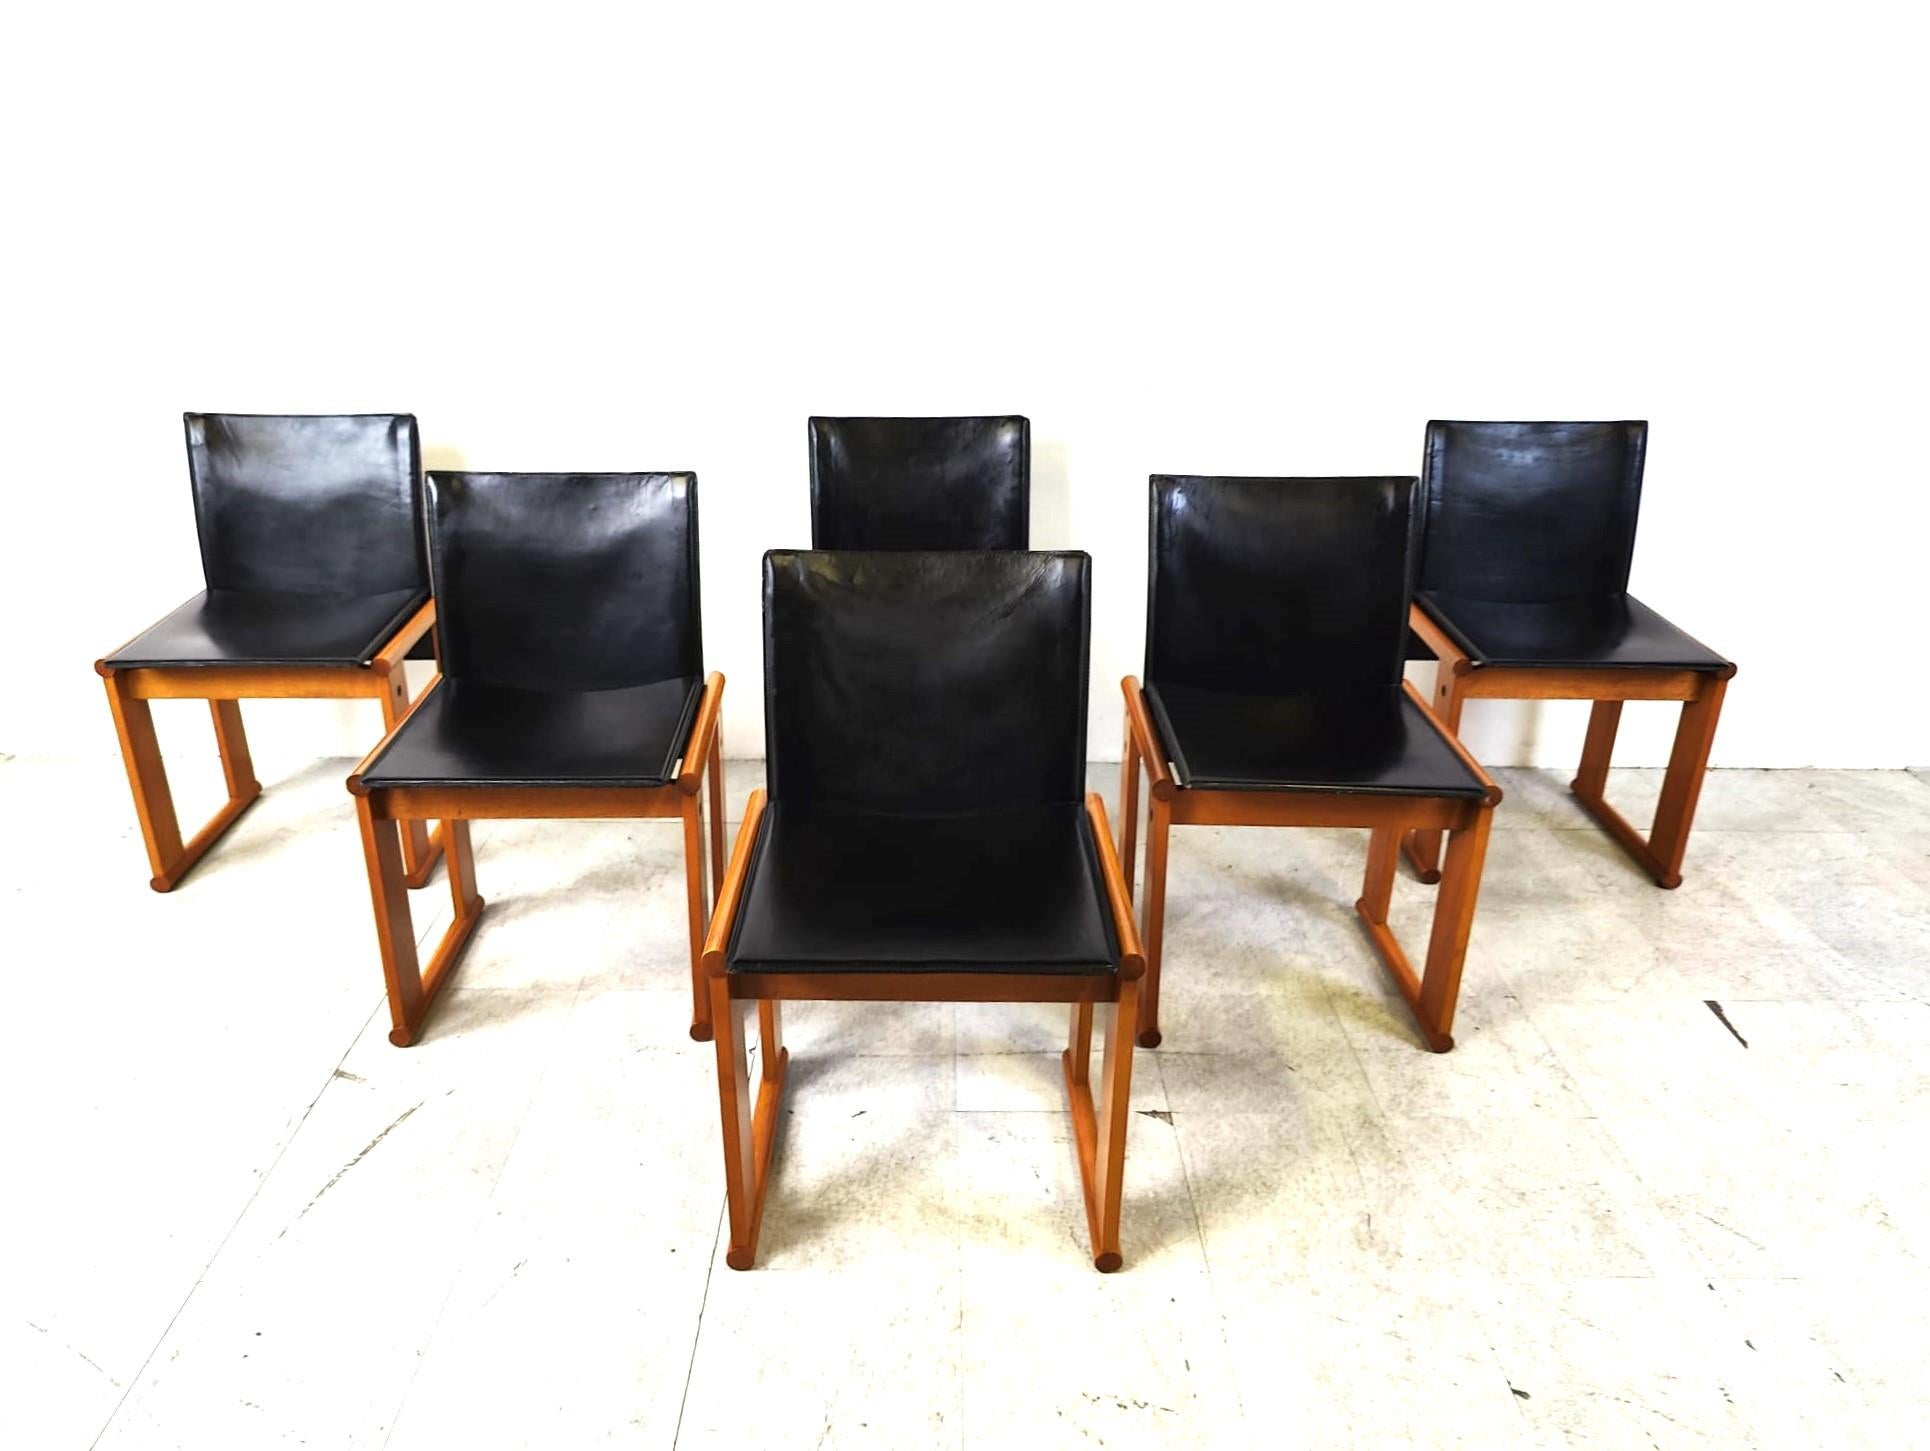 Set of 6 dining chairs designed by Tobia & Afra Scarpa for Molteni.

Beuatiful modern design wooden frames with black leather seats and backrests.

As ever, with Scarpa's designs, we have high quality standards and timeless design.

Good original